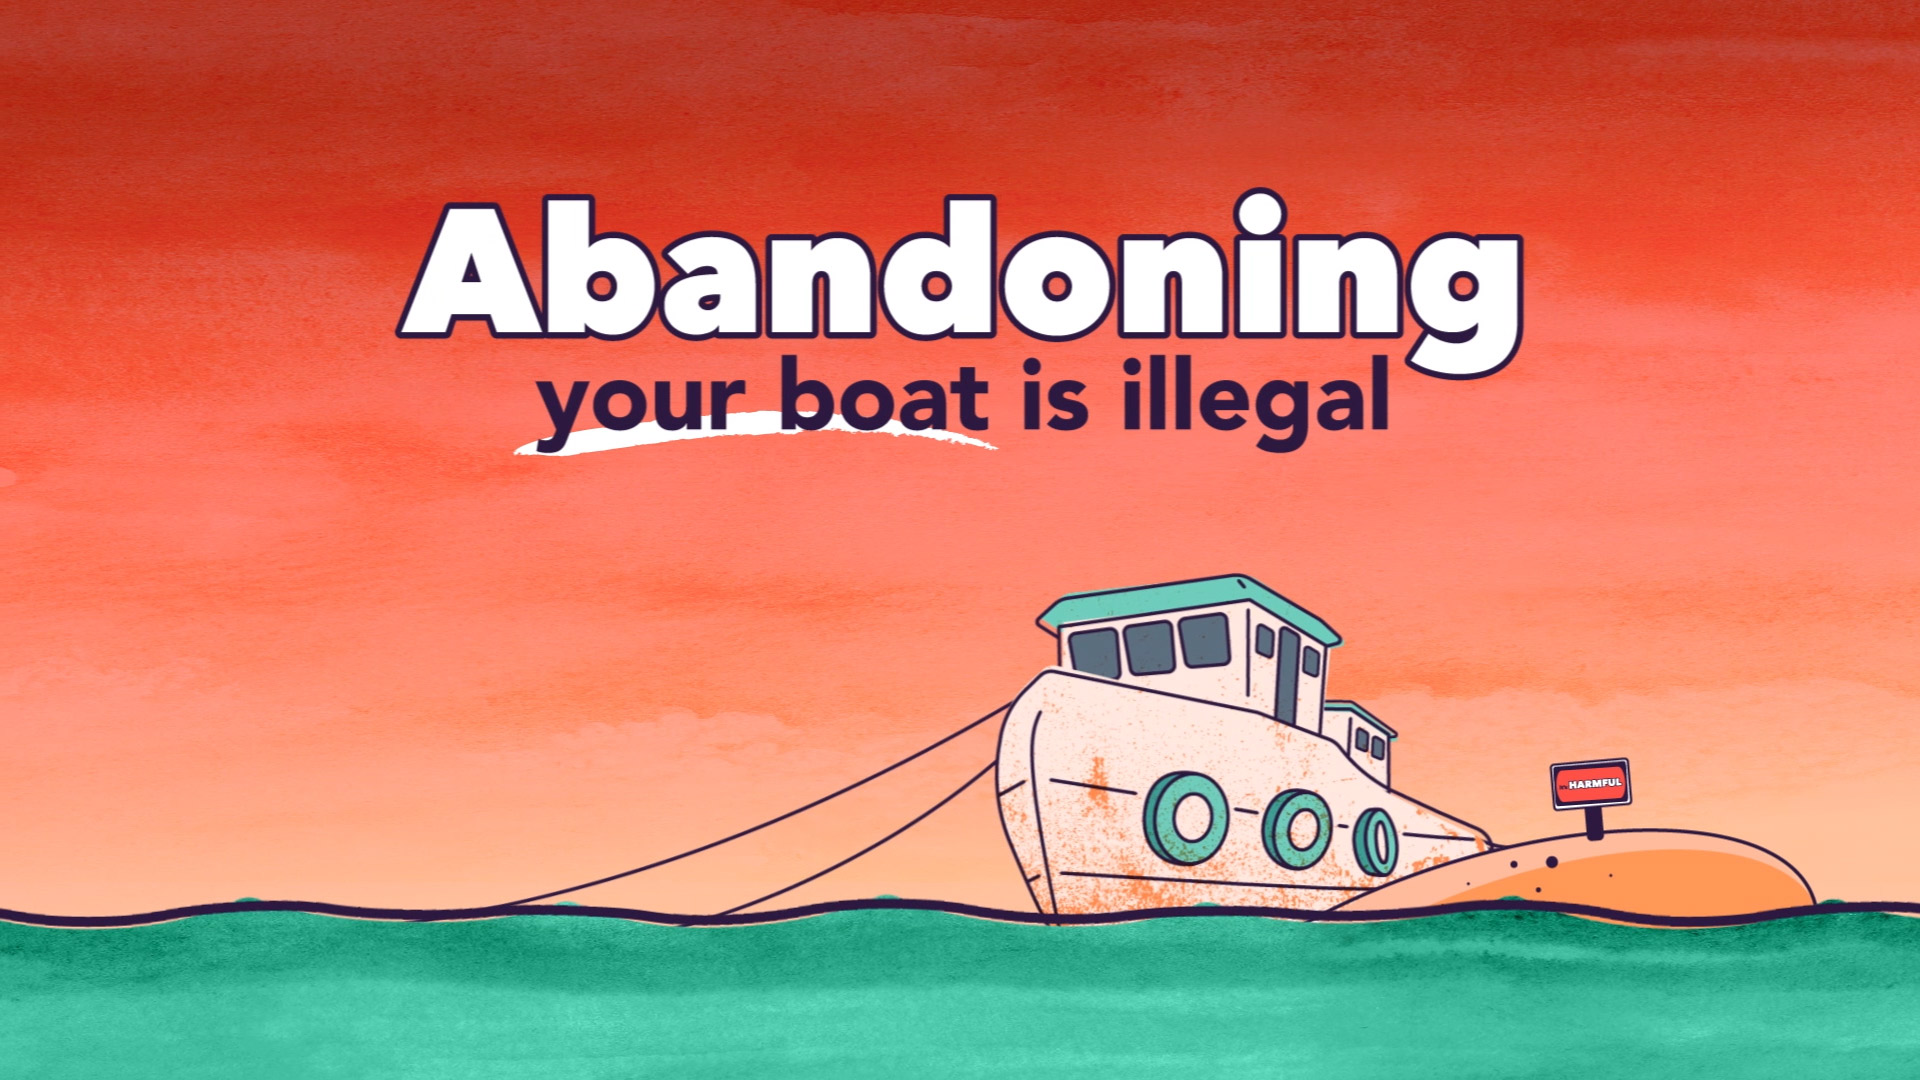 Abandoning your boat is illegal